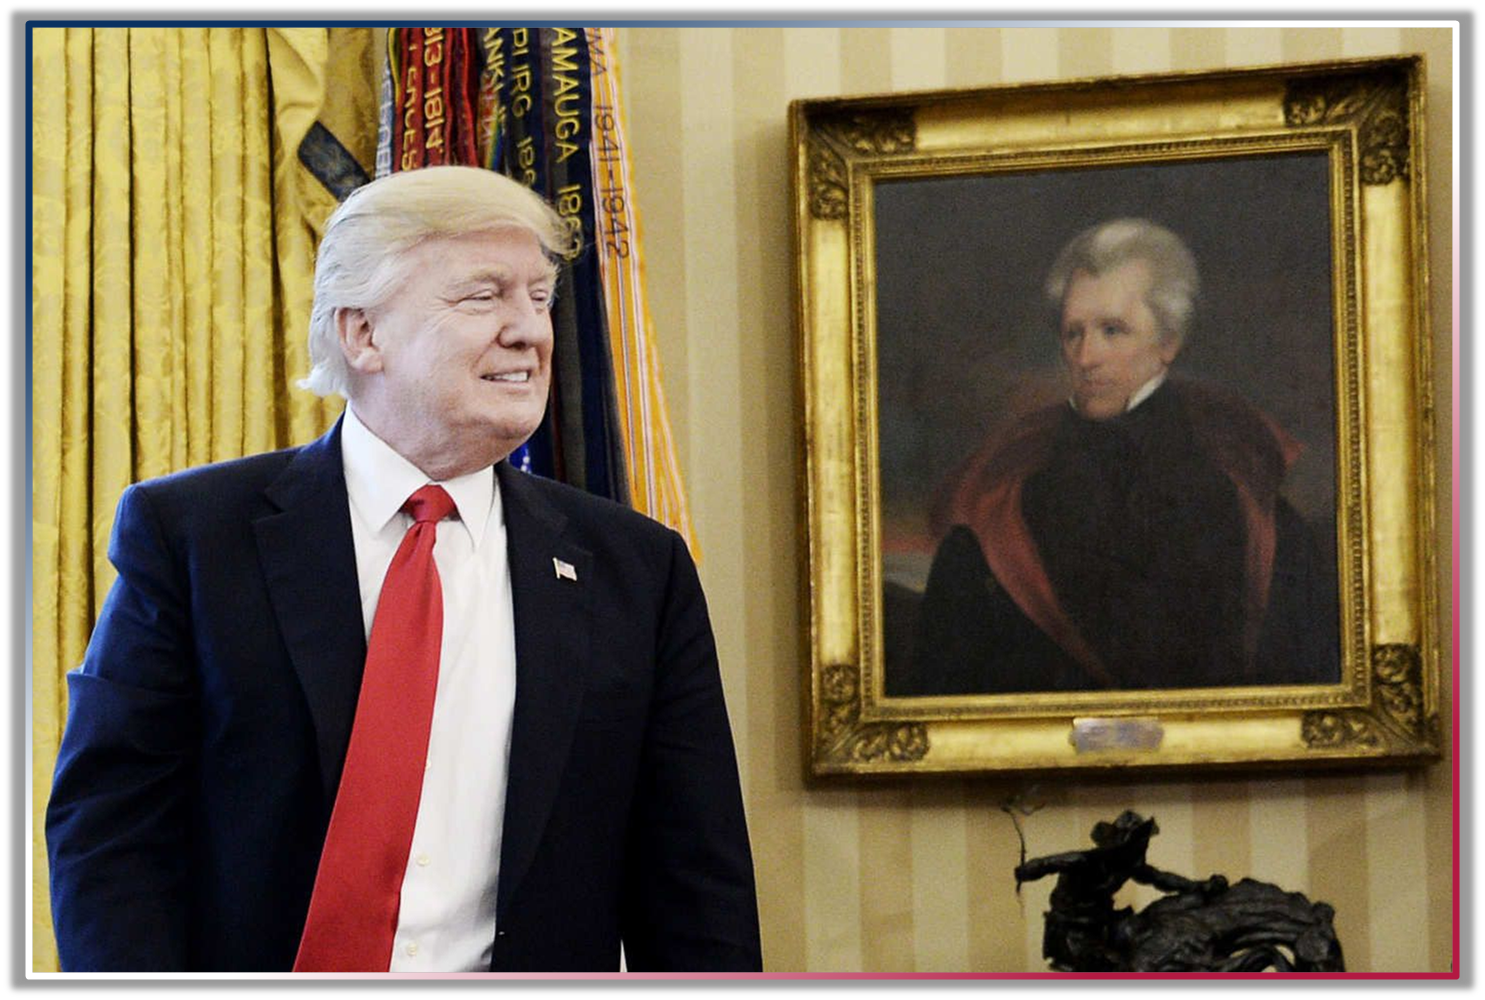 Two Presidents; Donald Trump #45 and Andrew Jackson #7